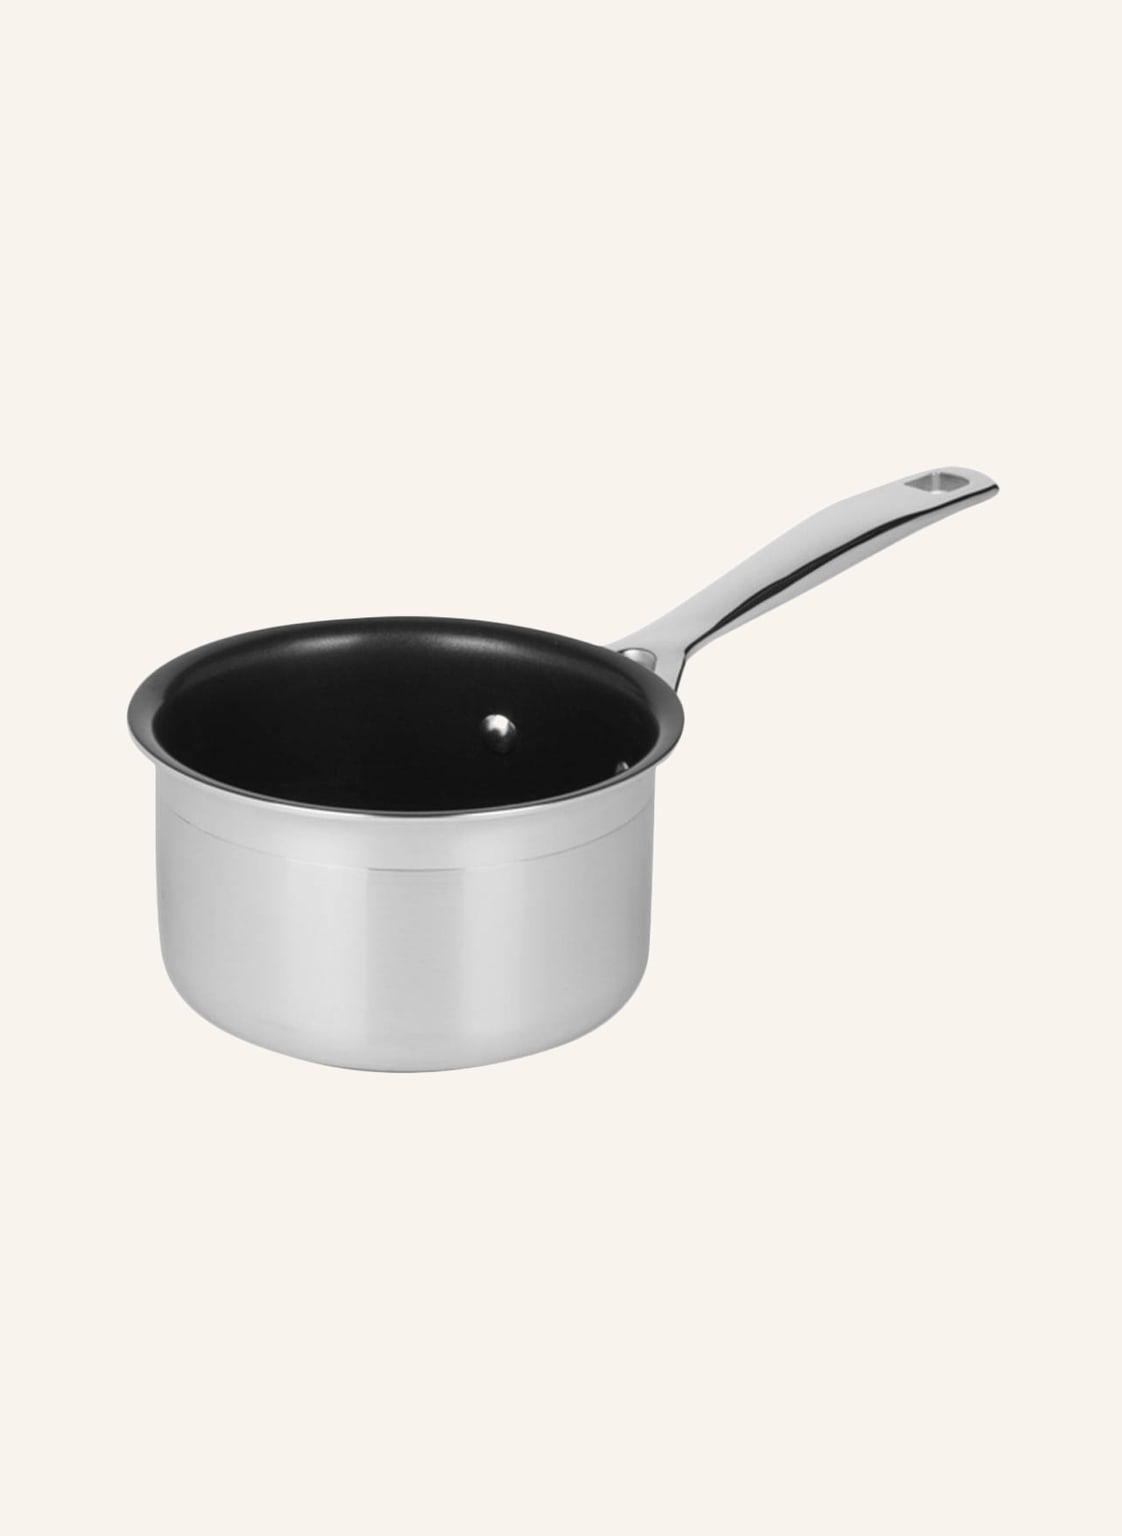 Image of Le Creuset Milchtopf 3-Ply Antihaft silber